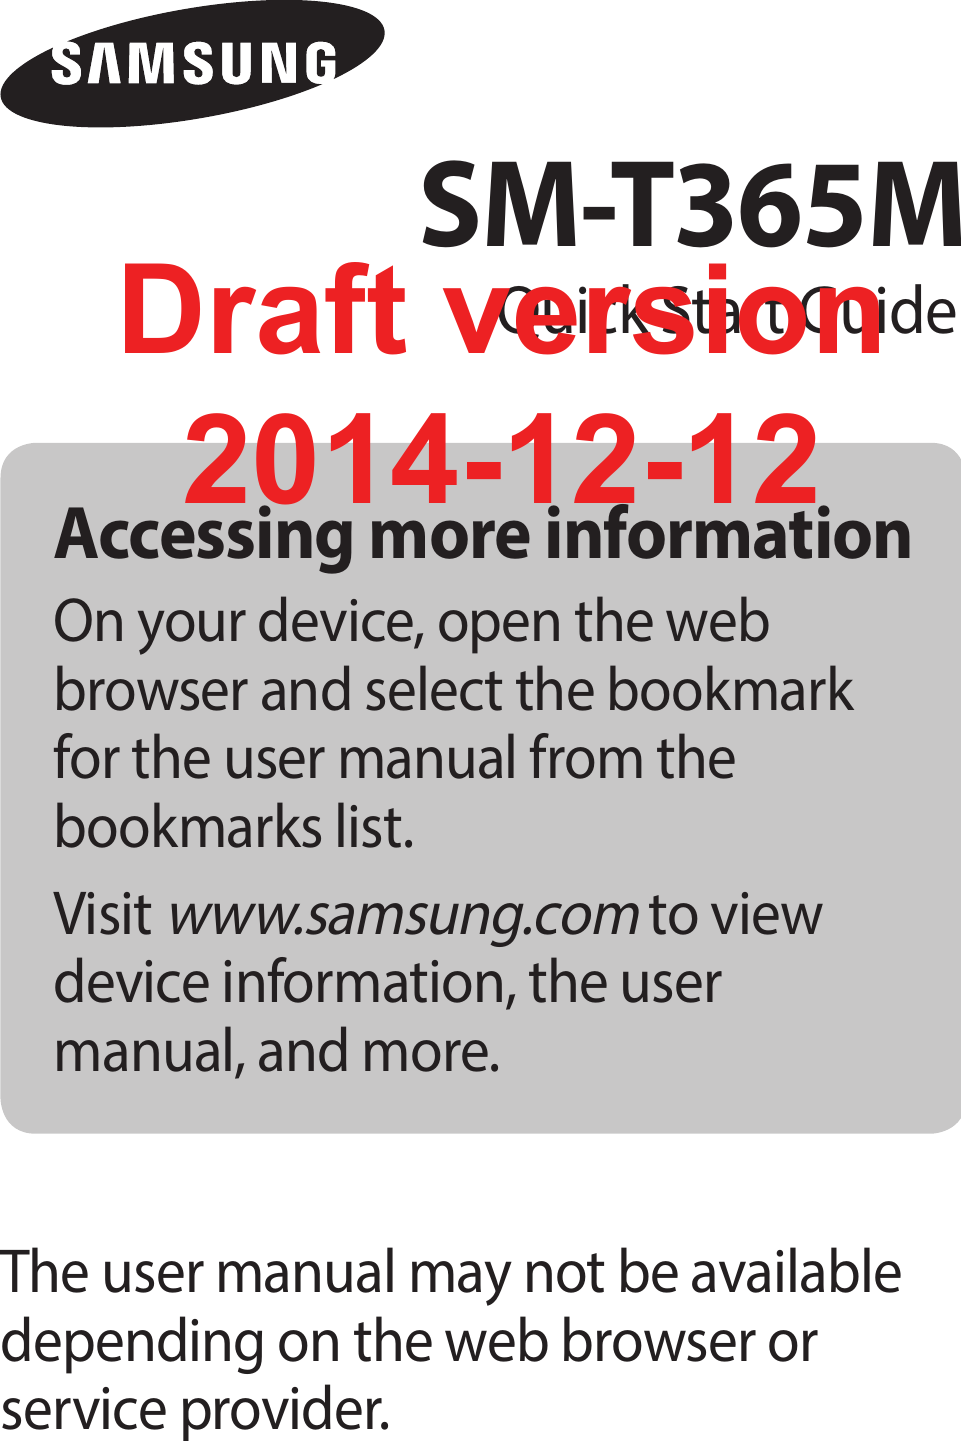 Accessing more informationOn your device, open the web browser and select the bookmark for the user manual from the bookmarks list.Visit www.samsung.com to view device information, the user manual, and more.The user manual may not be available depending on the web browser or service provider.SM-T365MQuick Start GuideDraft version2014-12-12